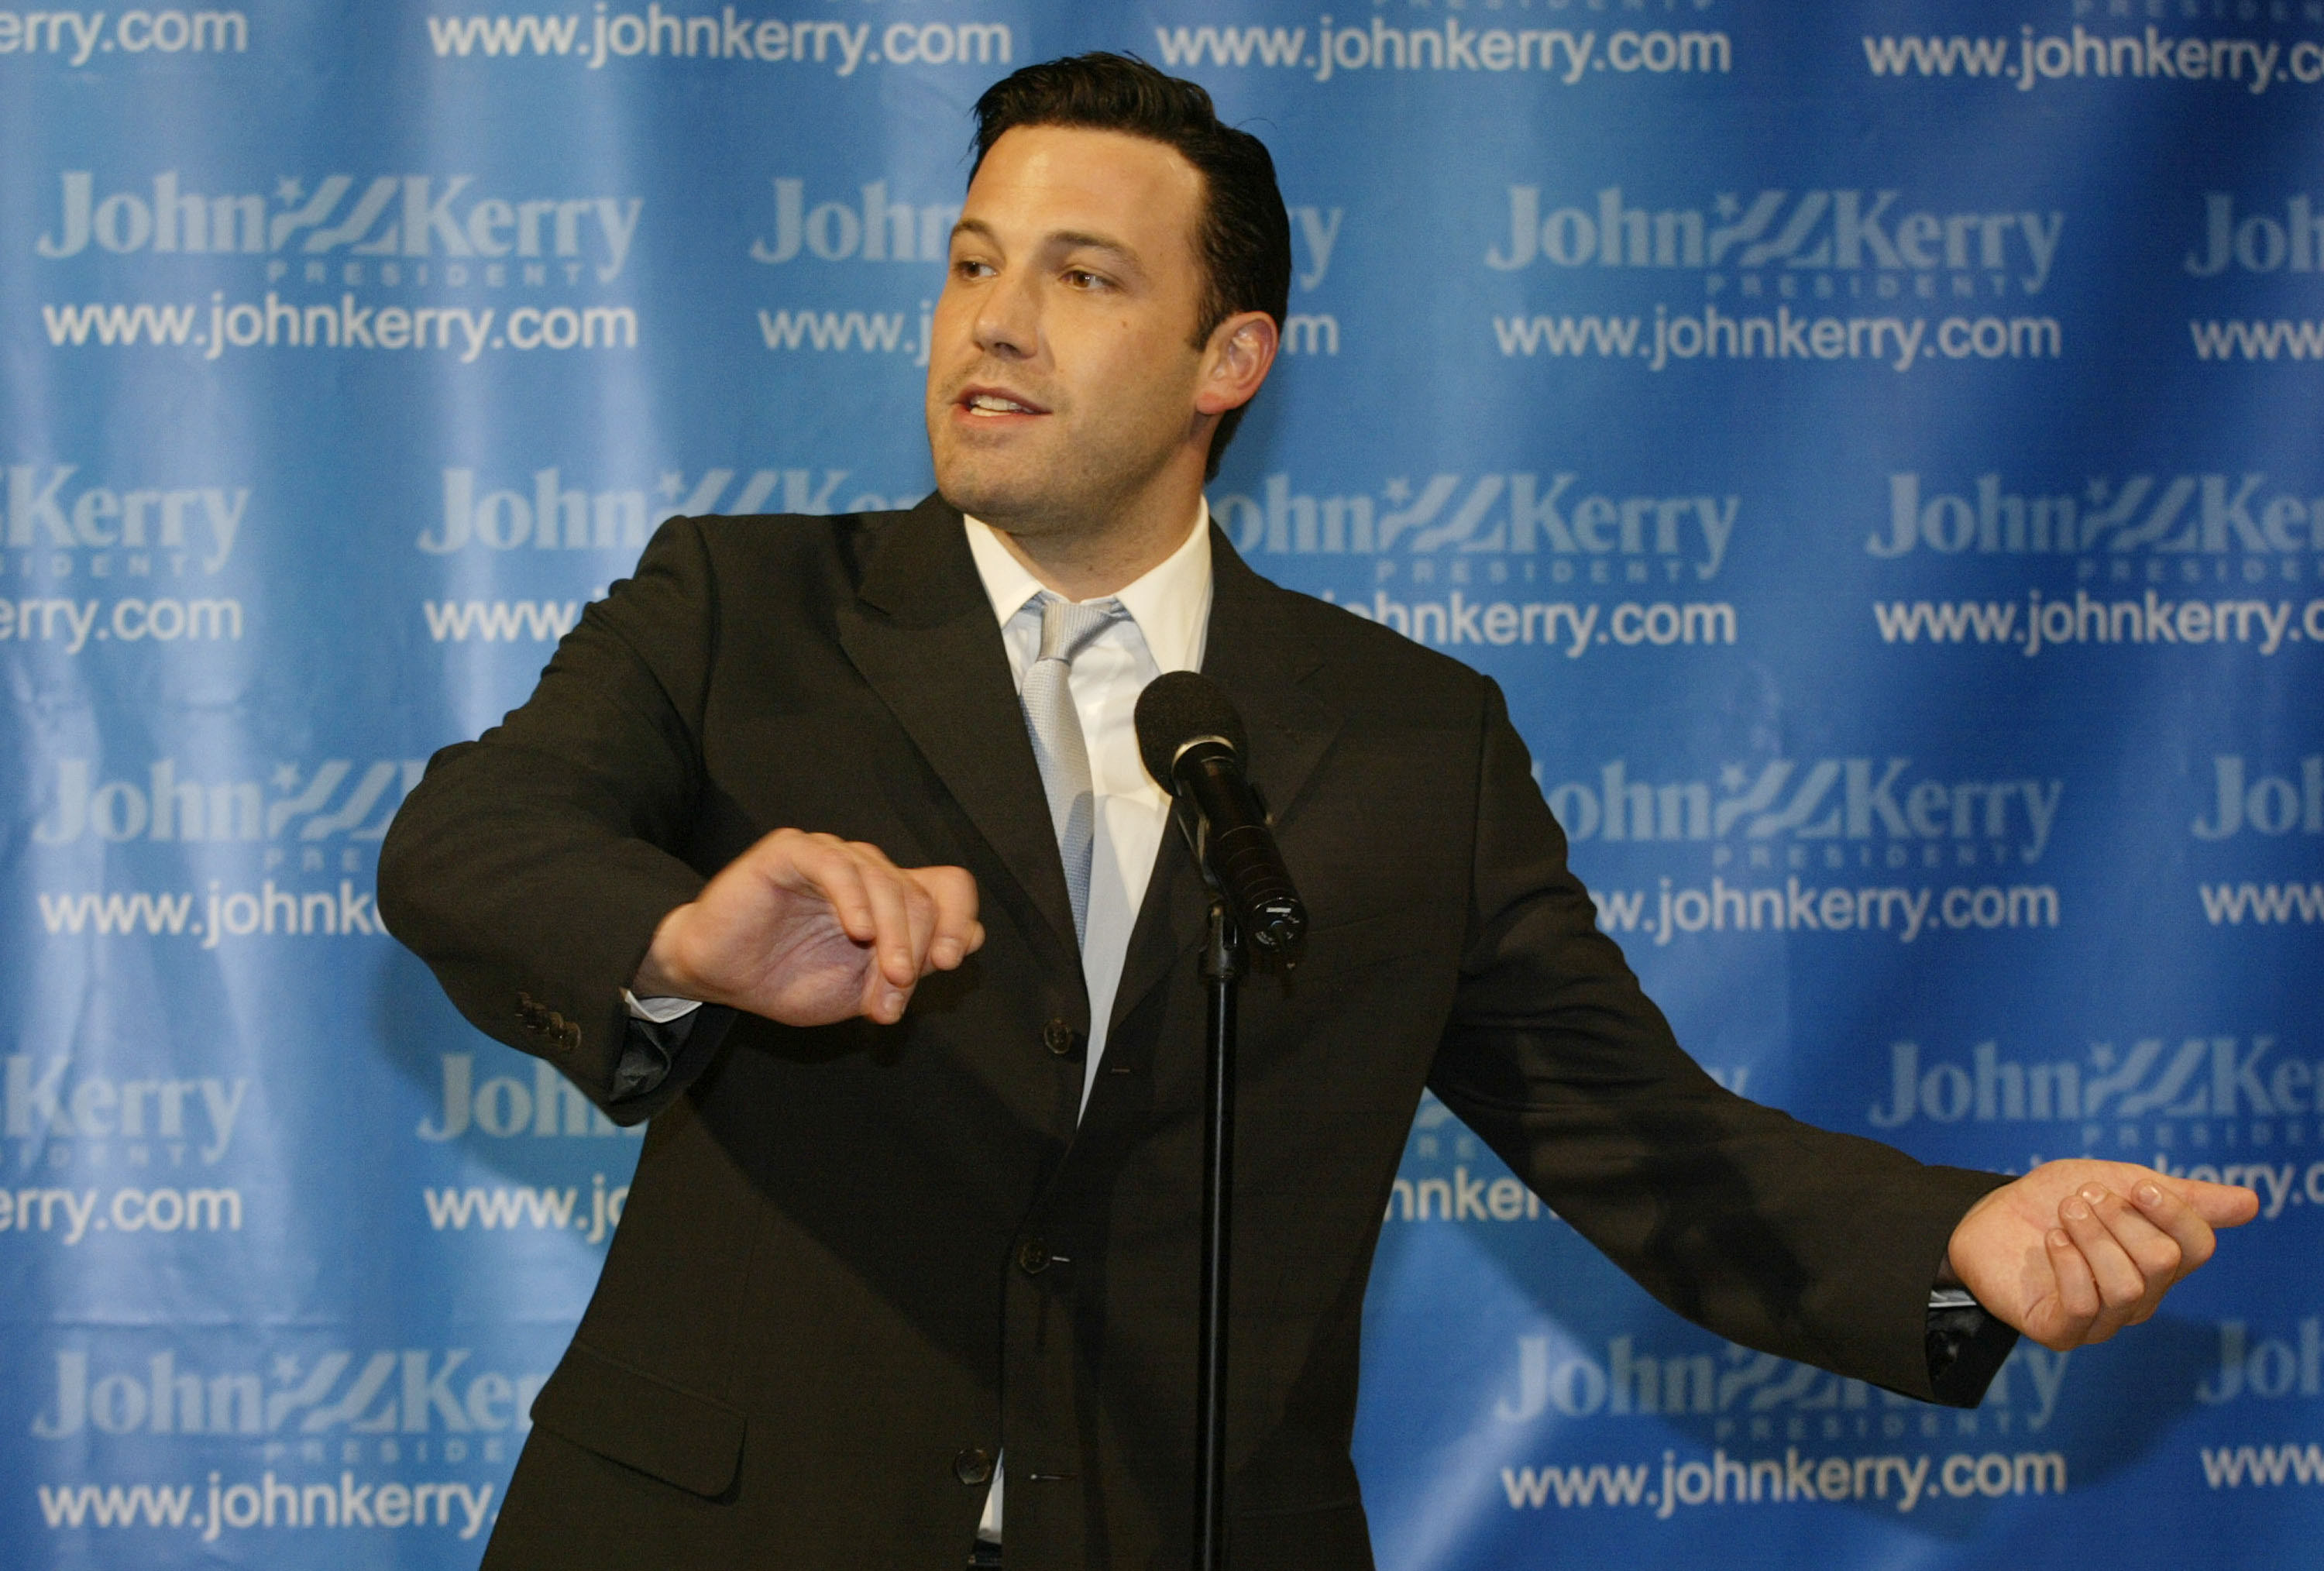 Ben speaks during a campaign event